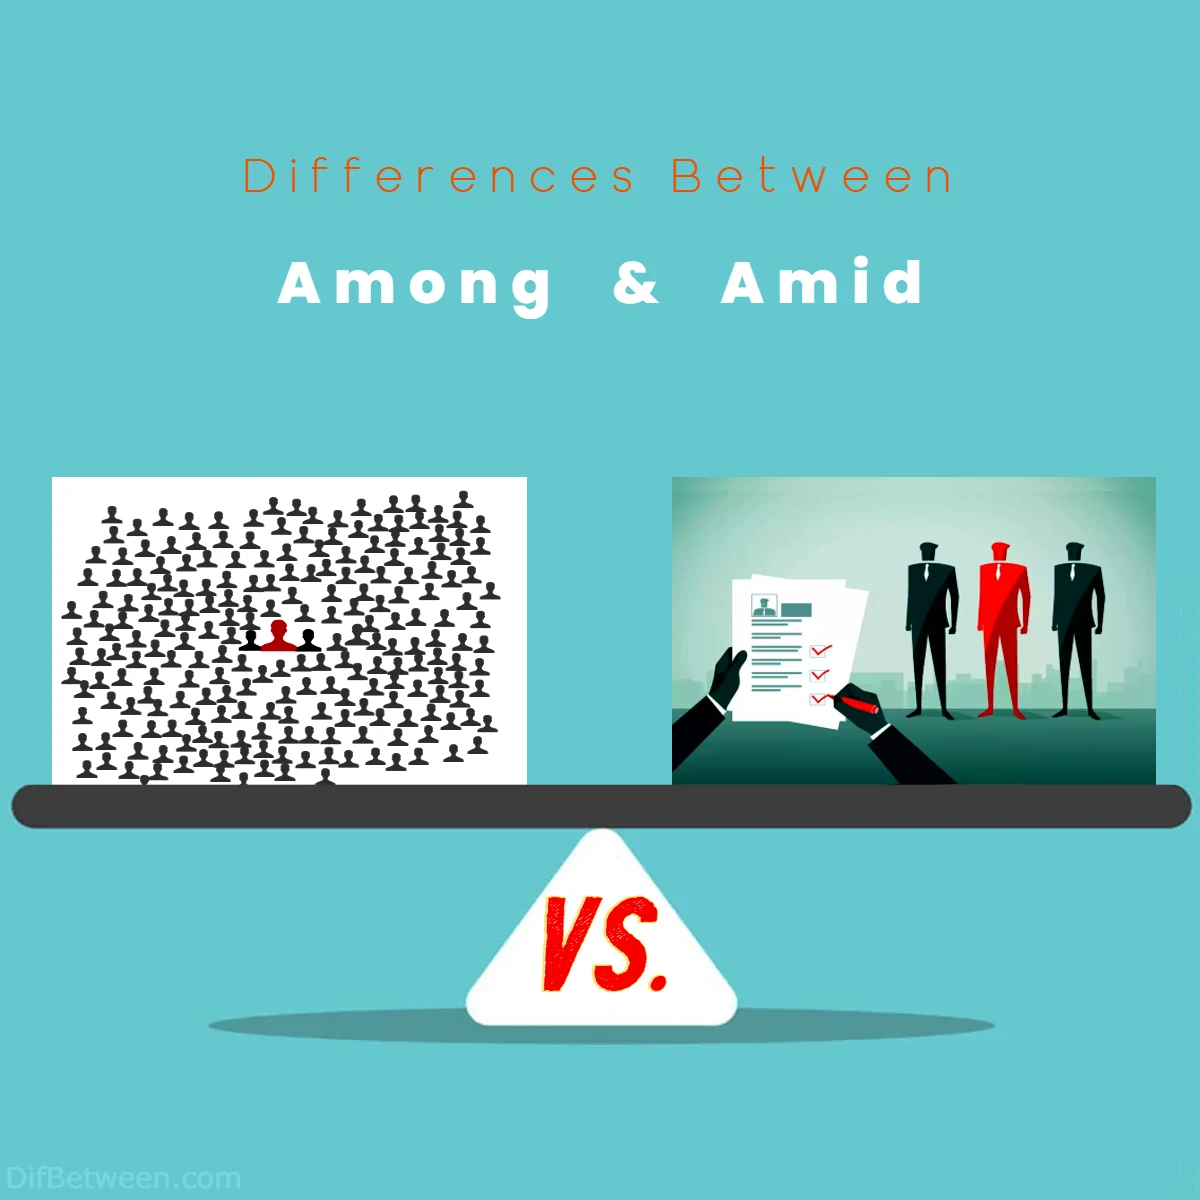 Differences Between Among vs Amid